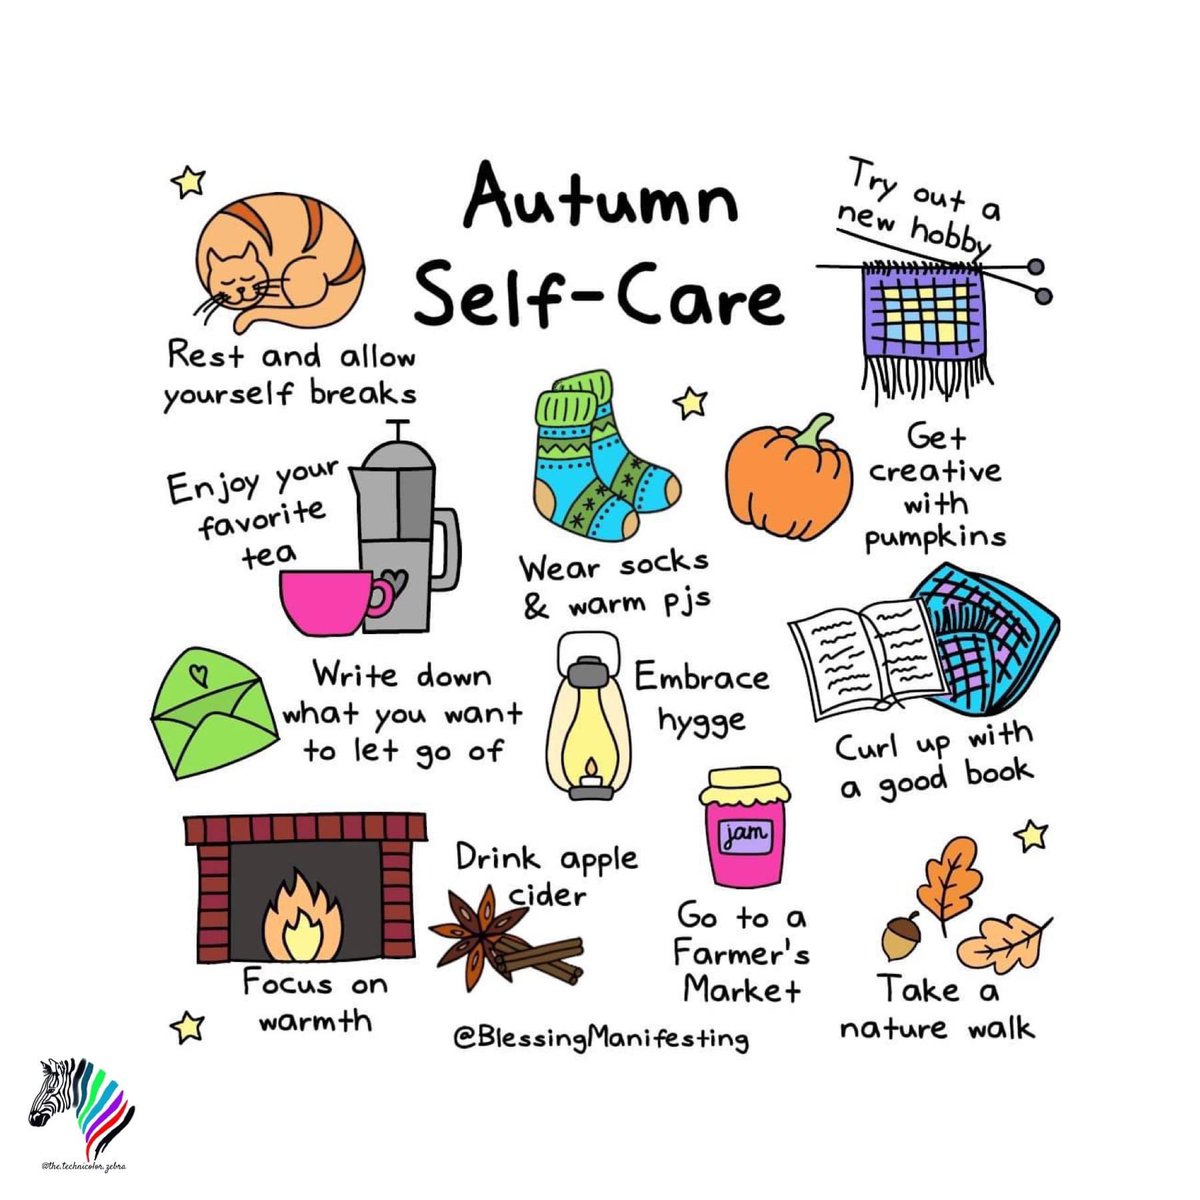 🍁 It is a #beautiful #Saturday to #PracticeSelfCare. Have you practiced some fun #AutumnSelfCare? Which fun activity did you partake in?
#InvisibleDisabilityWeek #VisibleCourage
#Disability #DisabilityAwareness
#MentalHealth #MentalHealthMatters #spoonie 
🎨:BlessingsManafesting